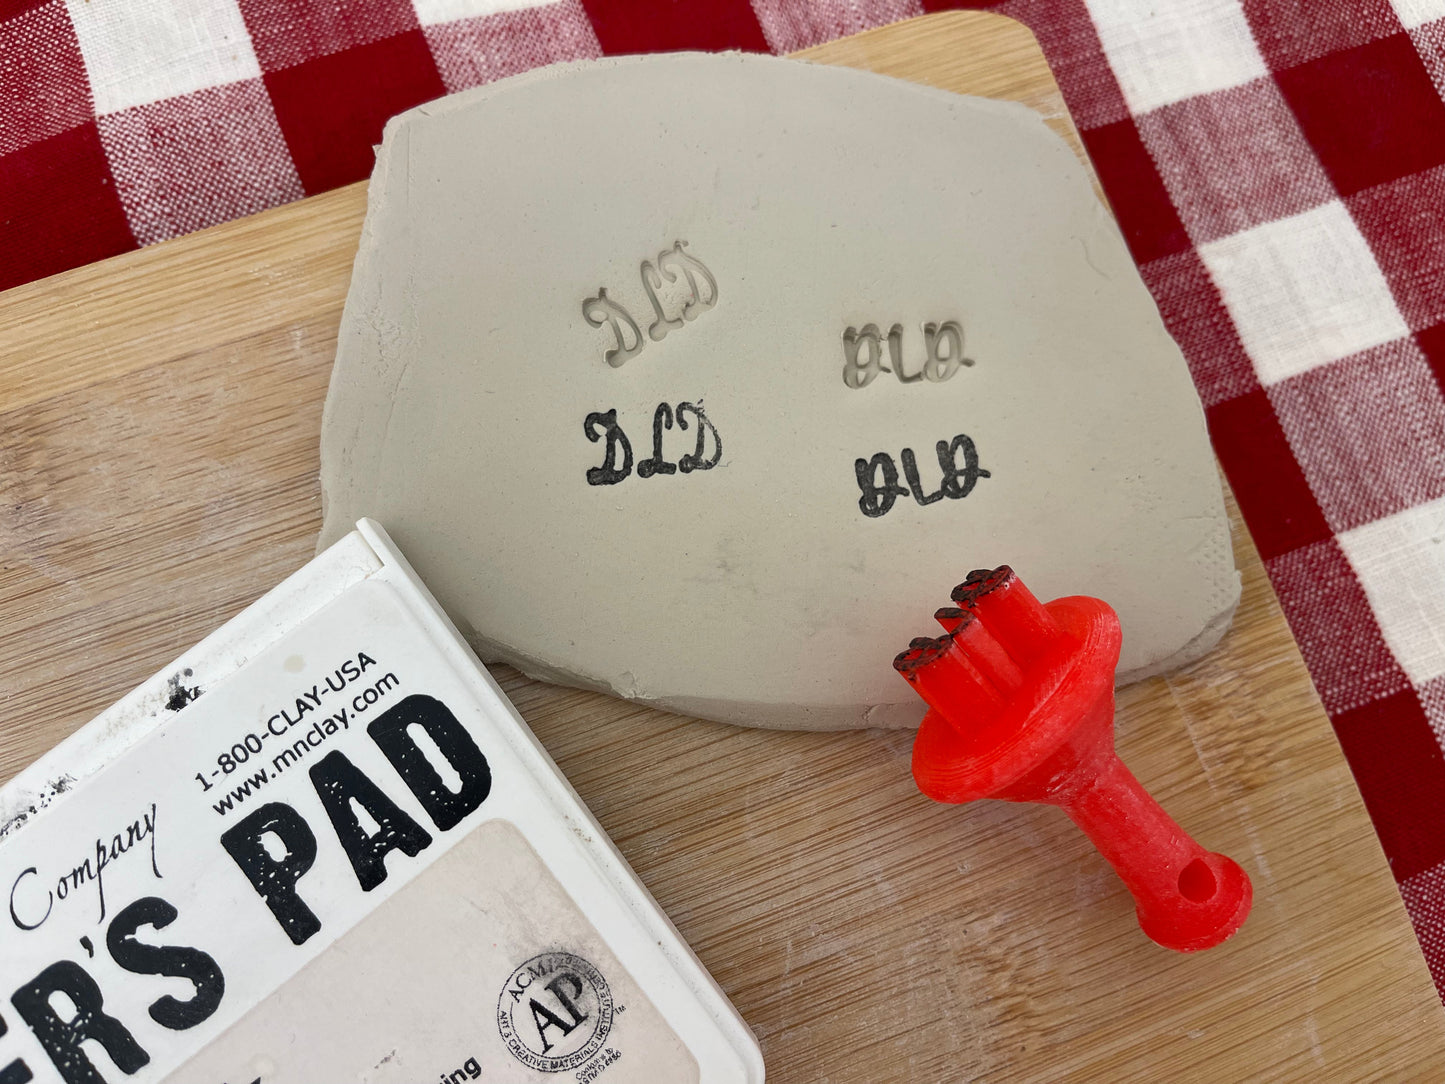 Maker's mark, Pottery Stamp, 1,2 or 3 initials, plastic 3d printed, choose font and size, signature stamp